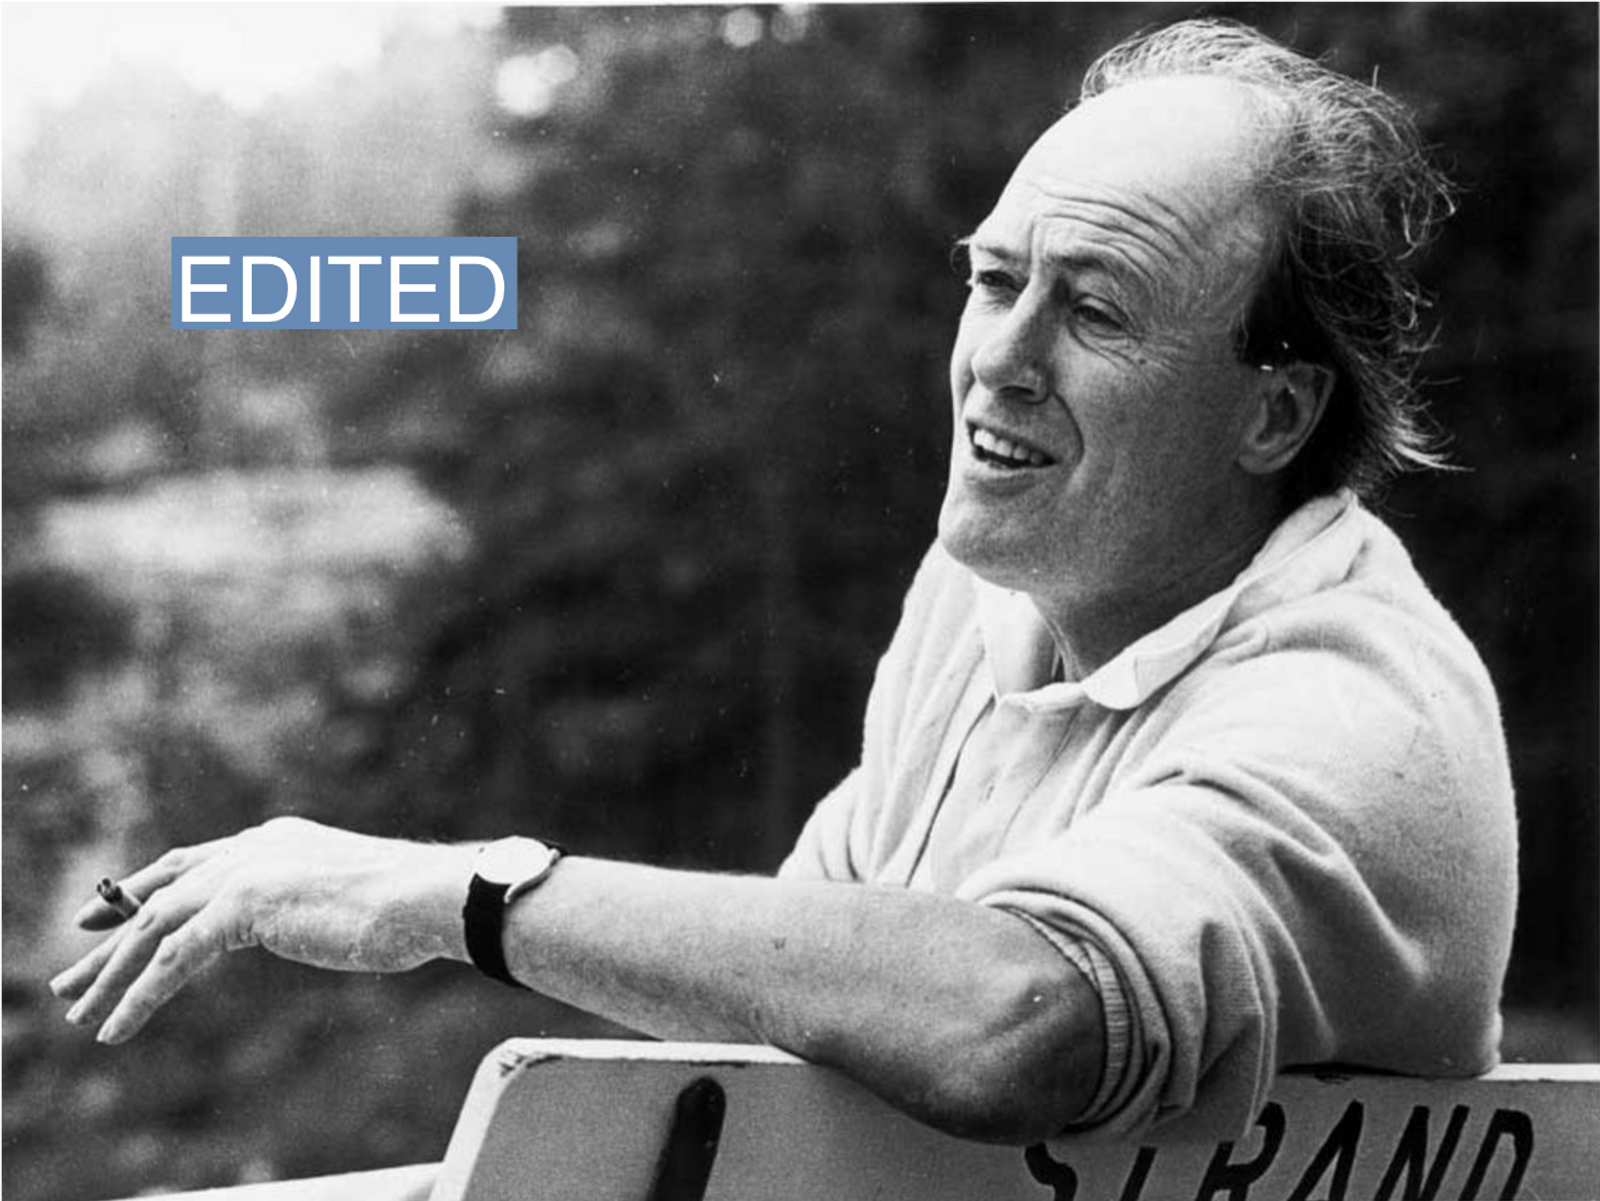 A black and white photo of Roald Dahl shows him smoking a cigarette on a bench.